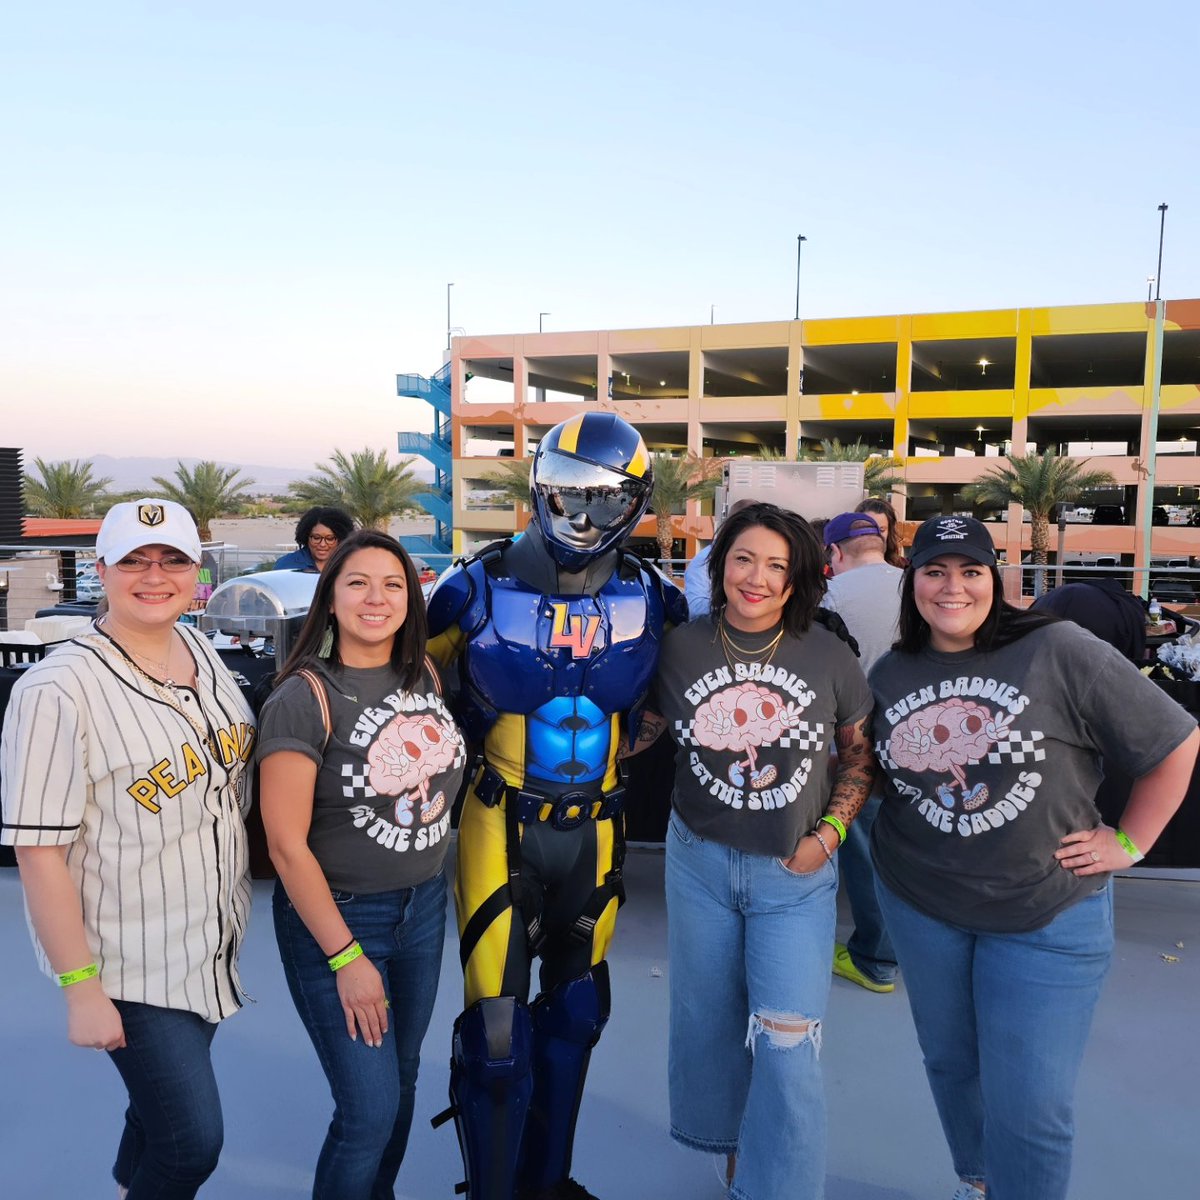 We had a fabulous time at the @thelvballpark watching the @LVAviators take on the Reno Aces with @hopemeansnevada and @AFSPNevada! Thank you to everyone who came out to support mental health and the #HomerunForHope baseball game during #MentalHealthMonth!! ⚾️💚